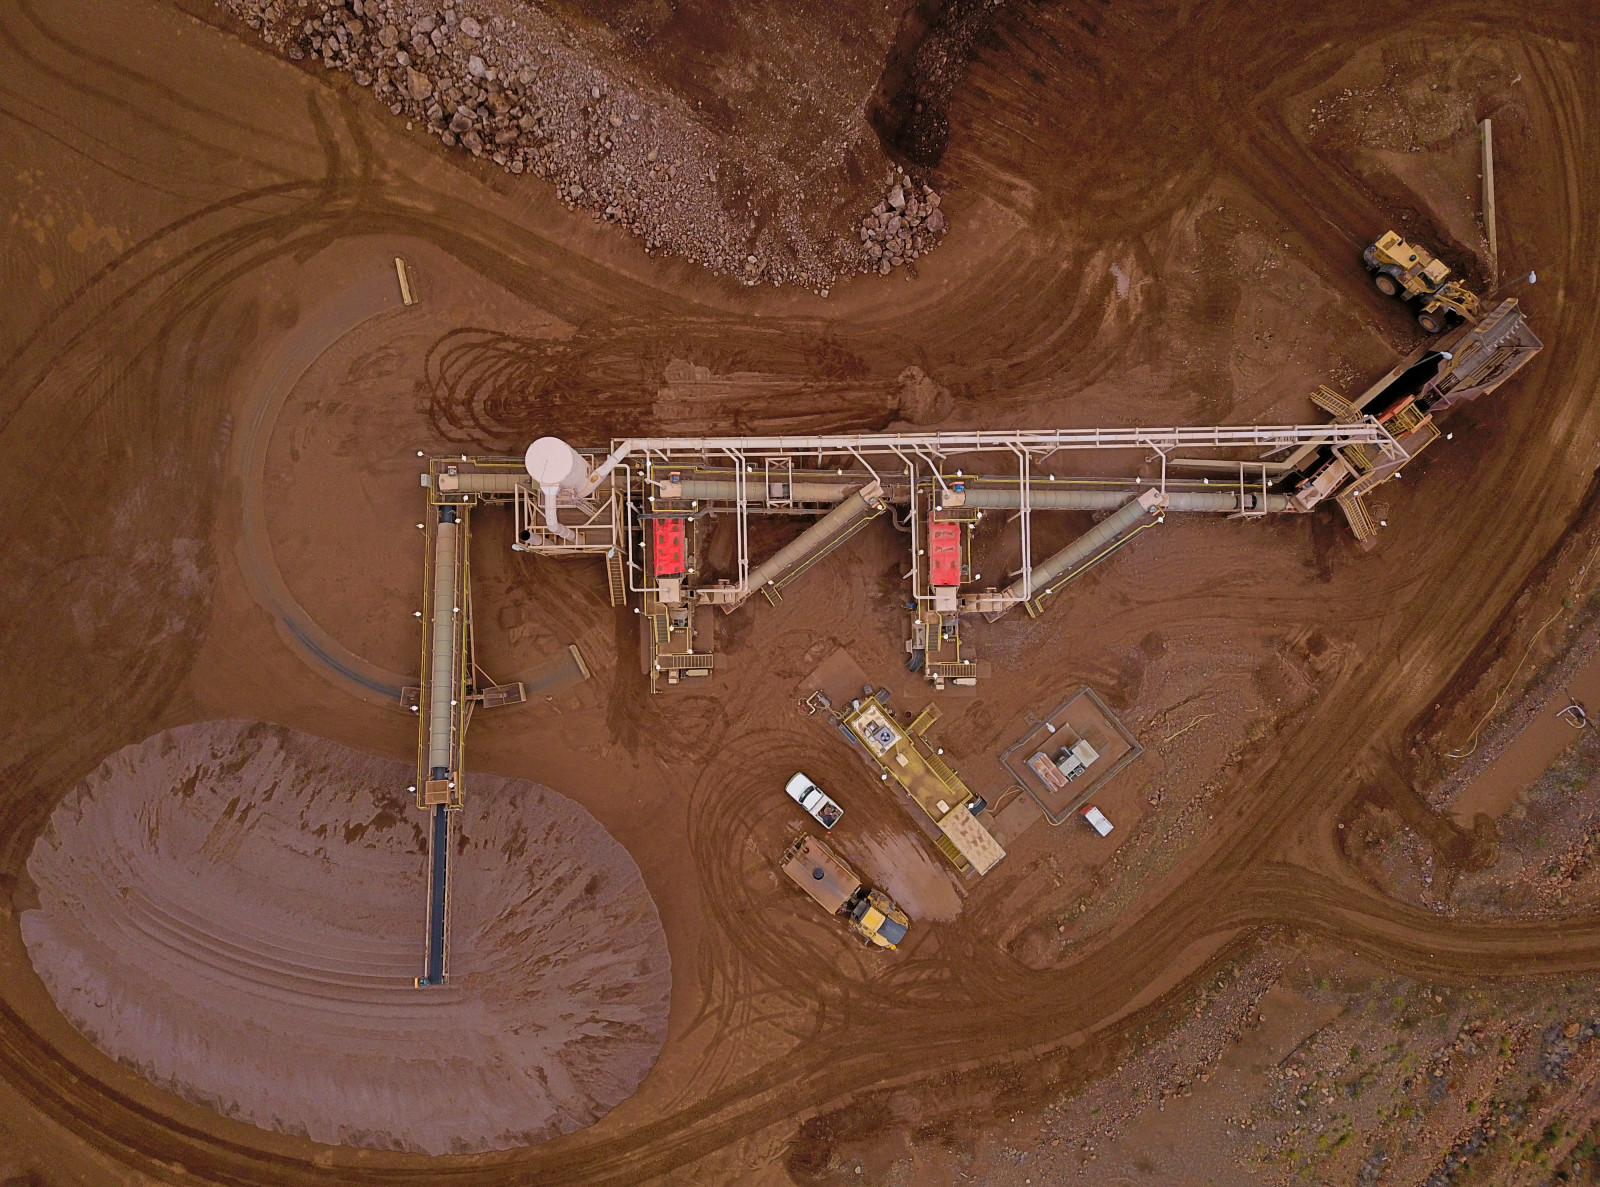 An aerial view of brown earth with mining equipment arrayed on top of it